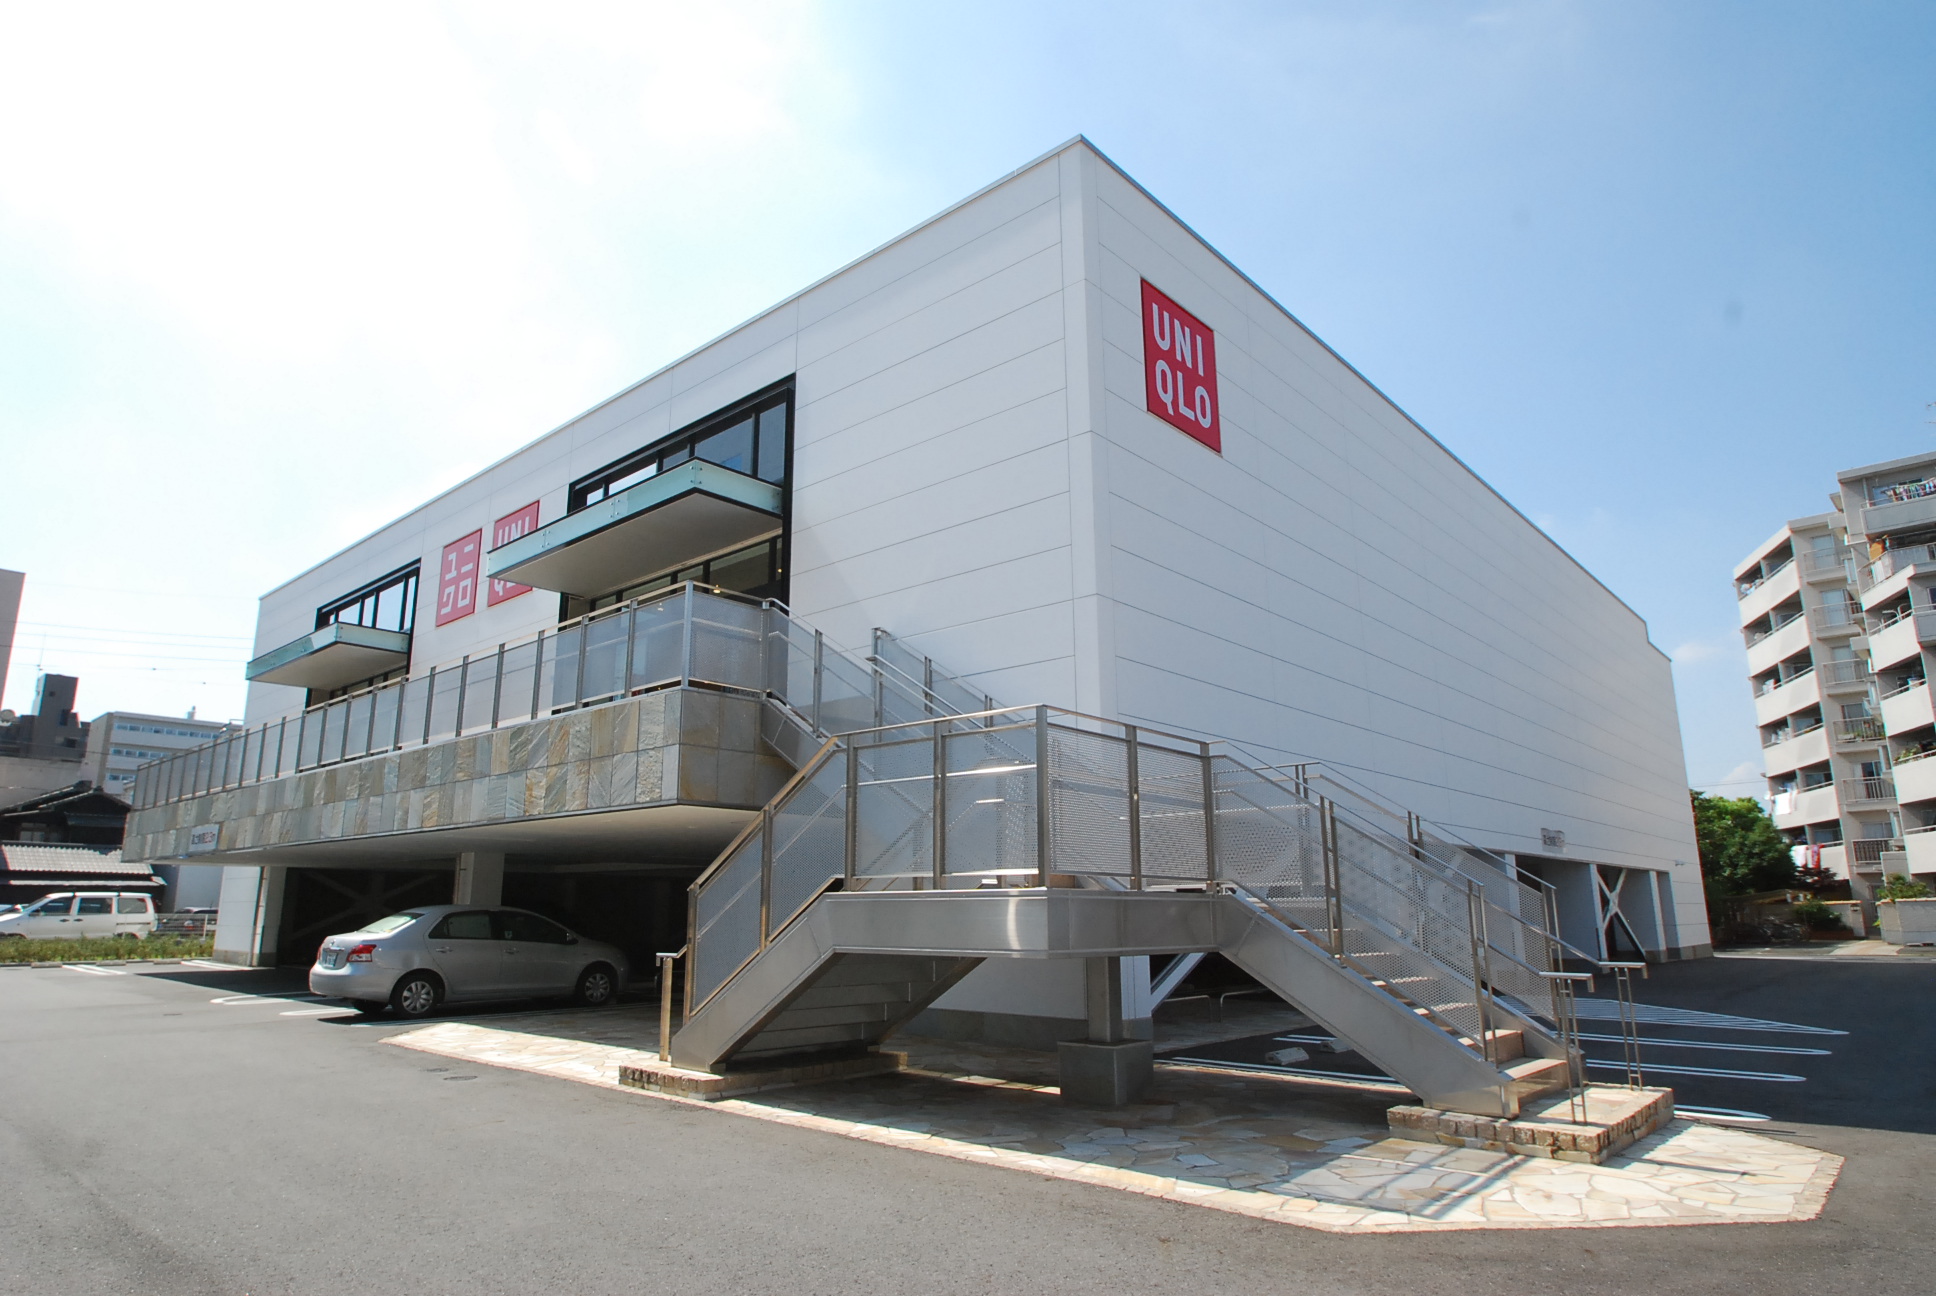 Shopping centre. 681m to UNIQLO white-walled shop (shopping center)